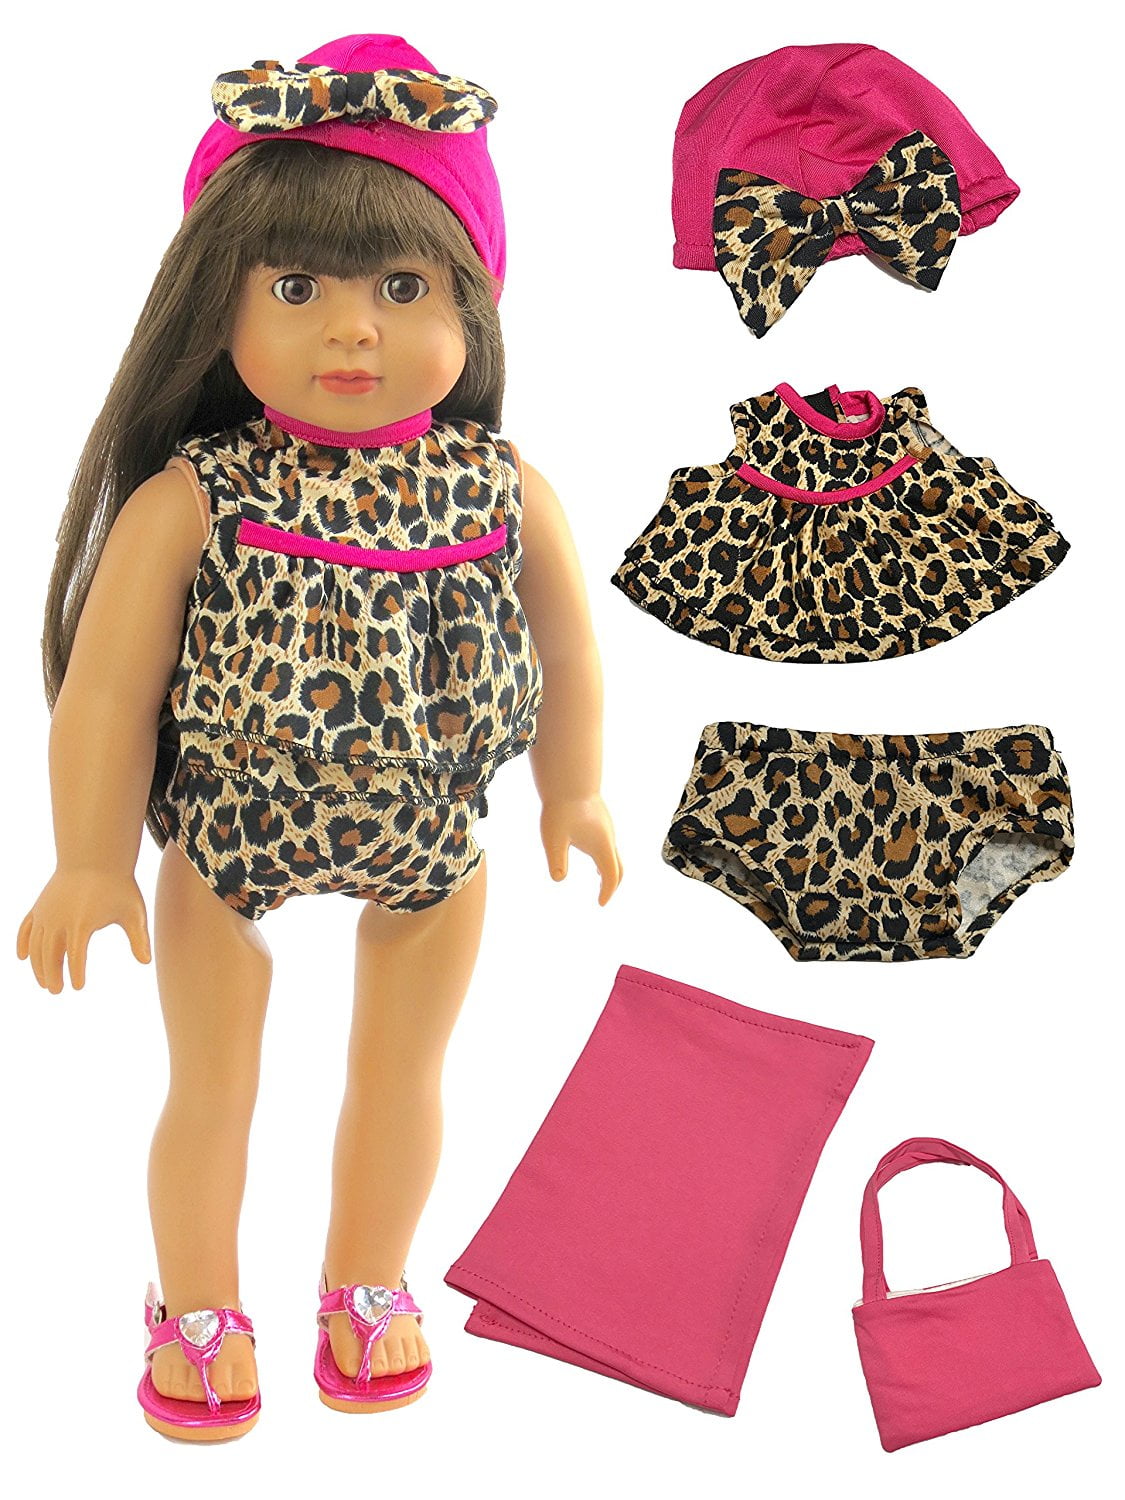 Tanosy 3 Sets Doll Bathing Suits Summer Bikini Holiday Beach Party Clothes for 18 inch Girl Doll Xmas Gift